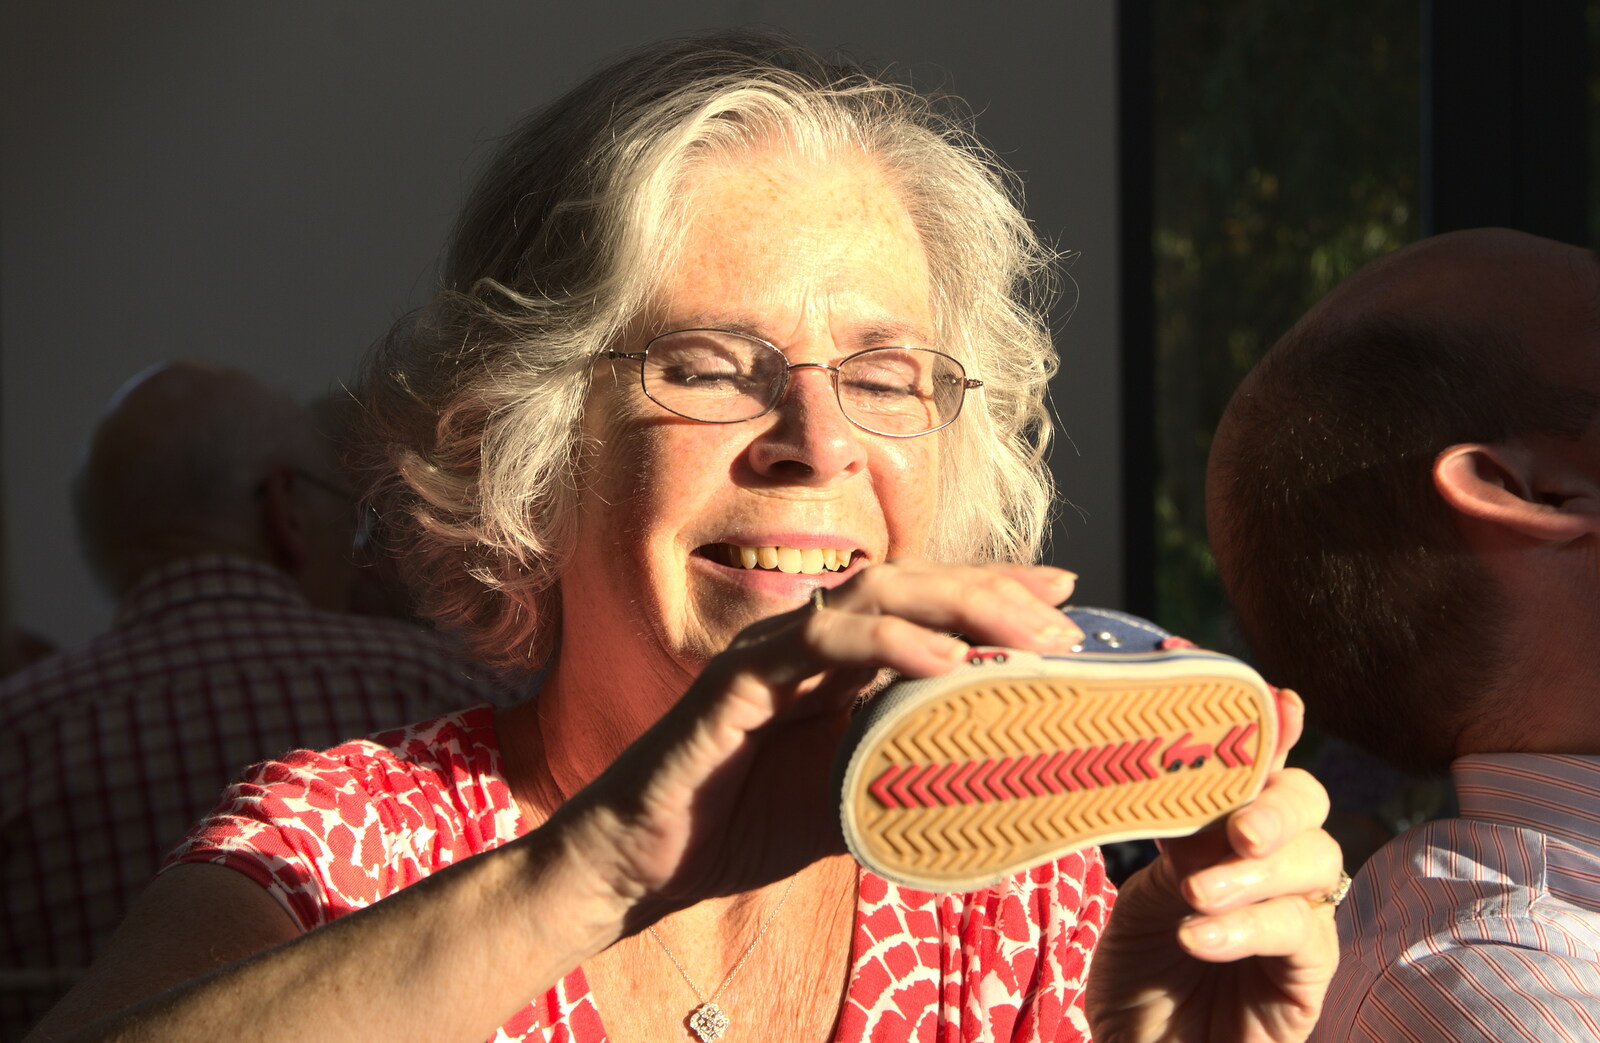 Bernice inspects a shoe from Bob and Bernice's 50th Wedding Anniversary, Hinton Admiral, Dorset - 25th July 2014